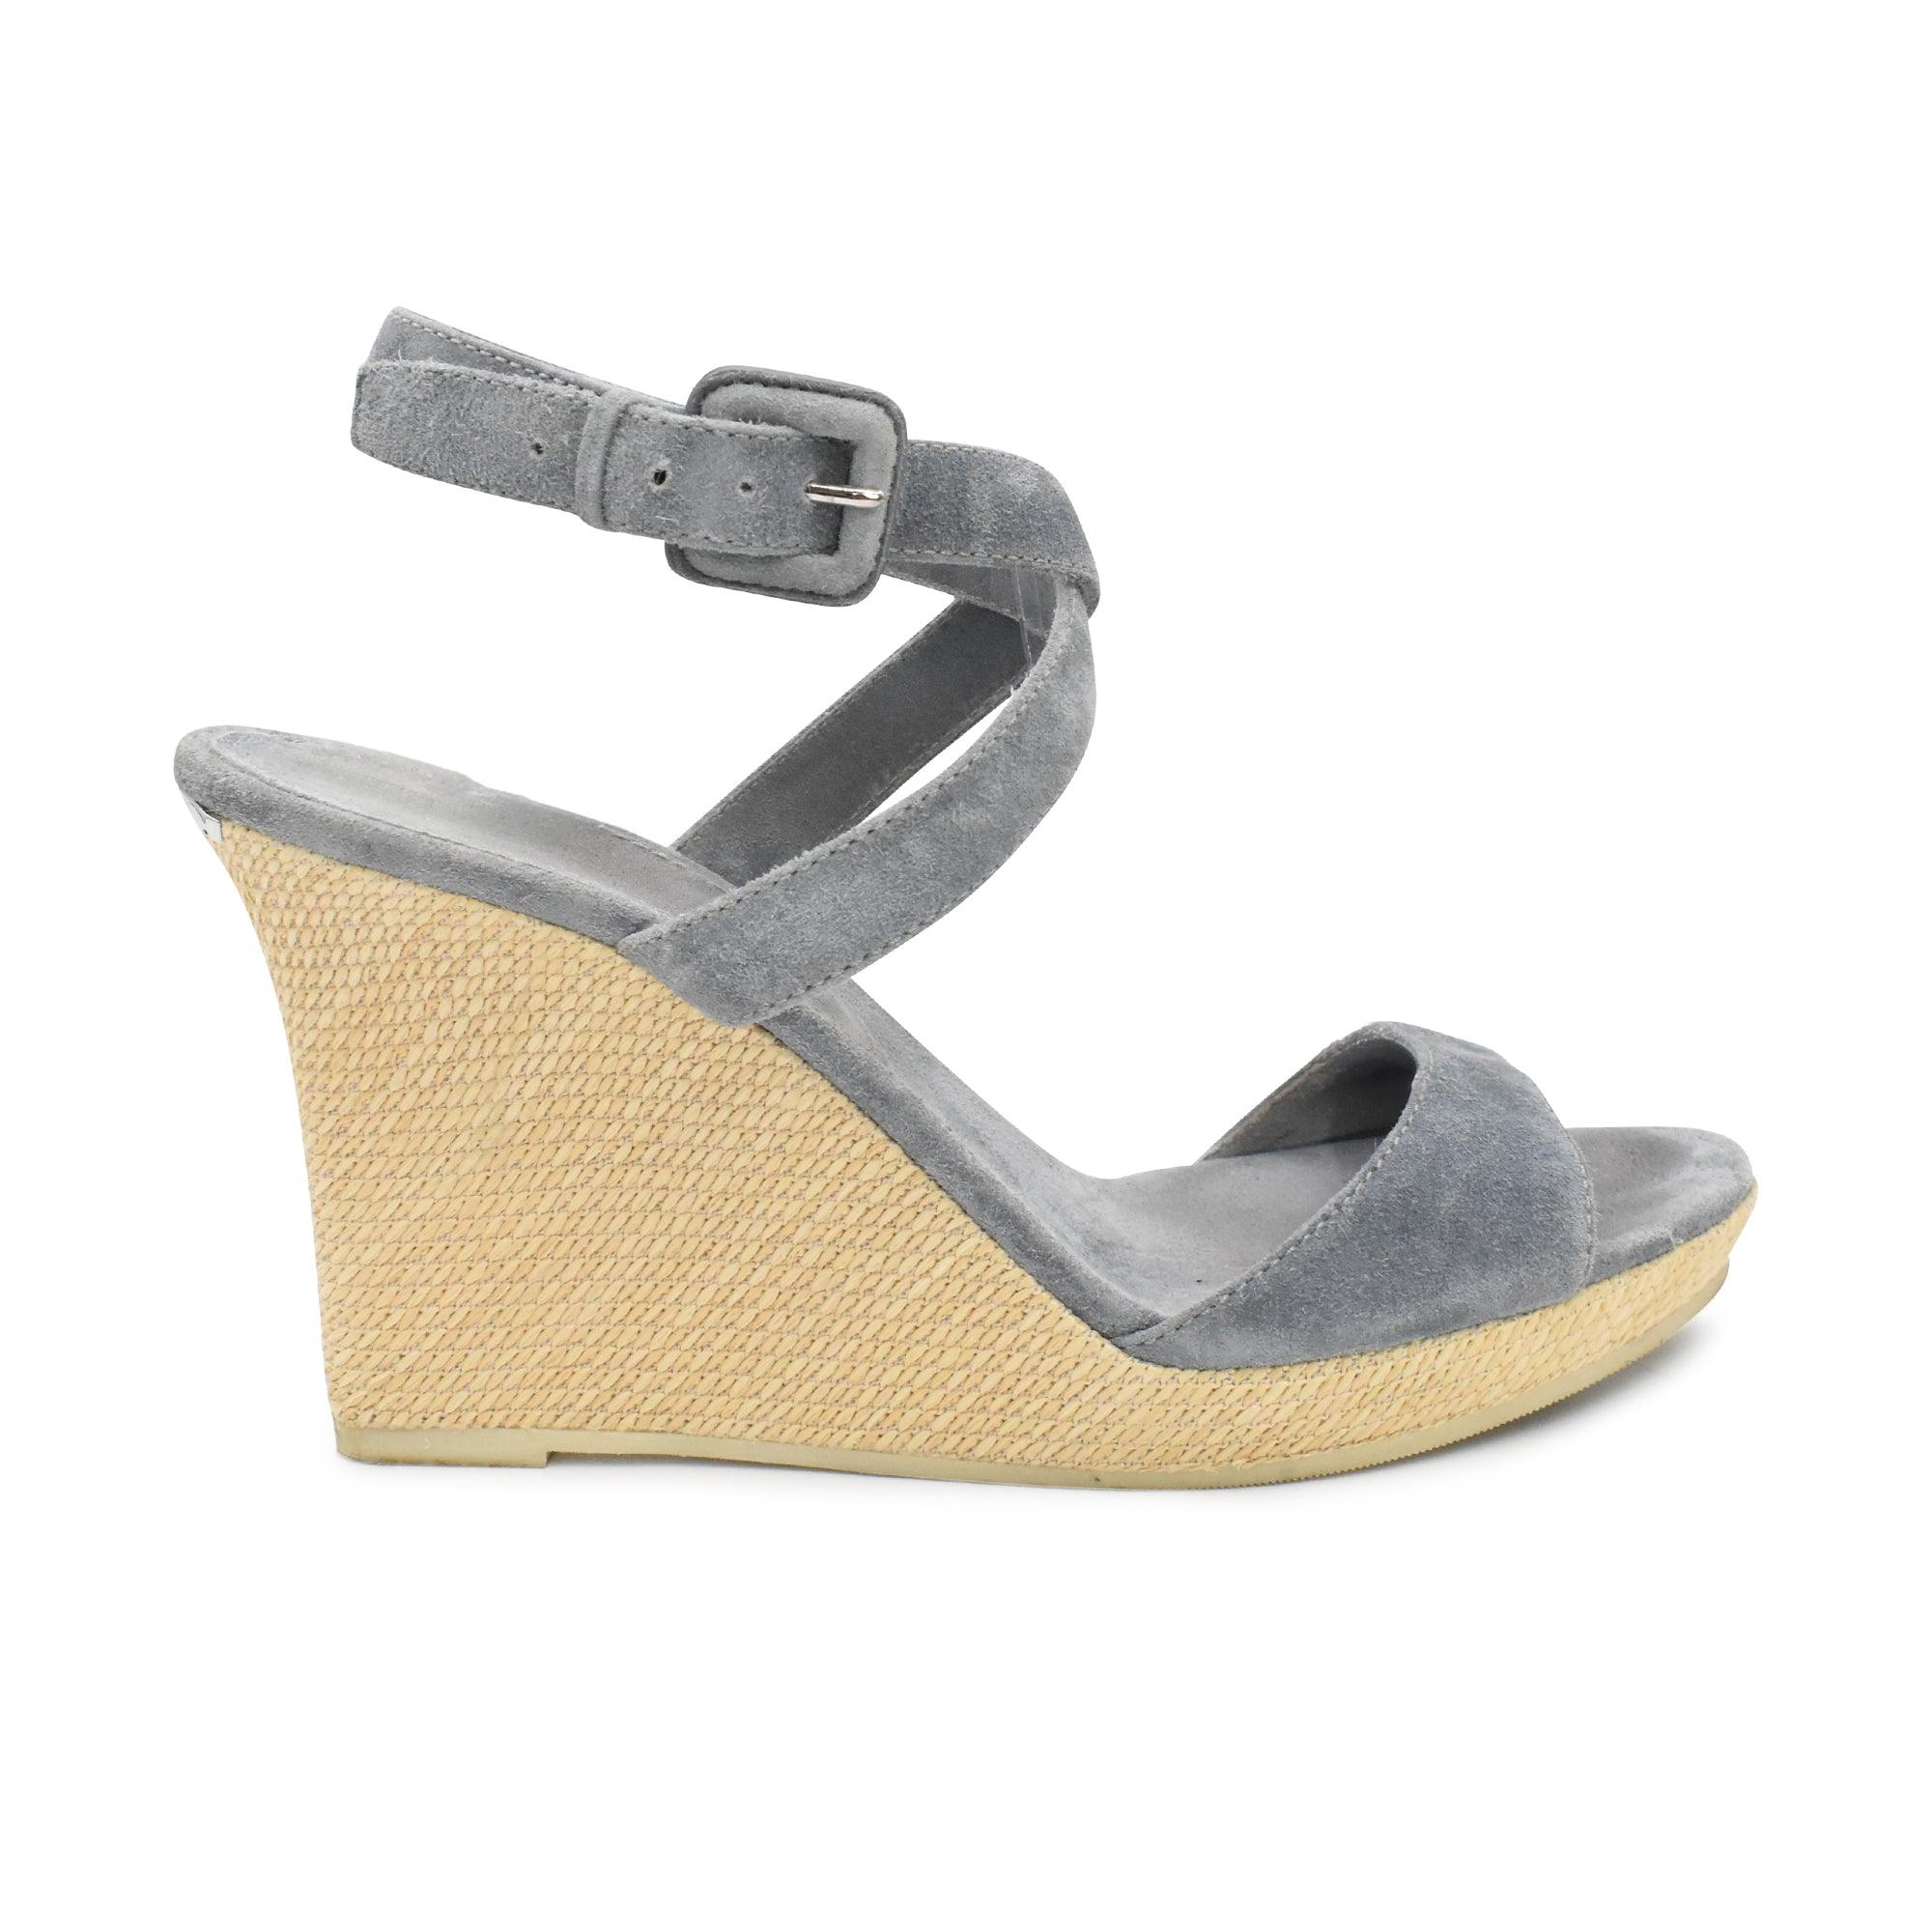 Burberry Wedges - Women's 39 - Fashionably Yours